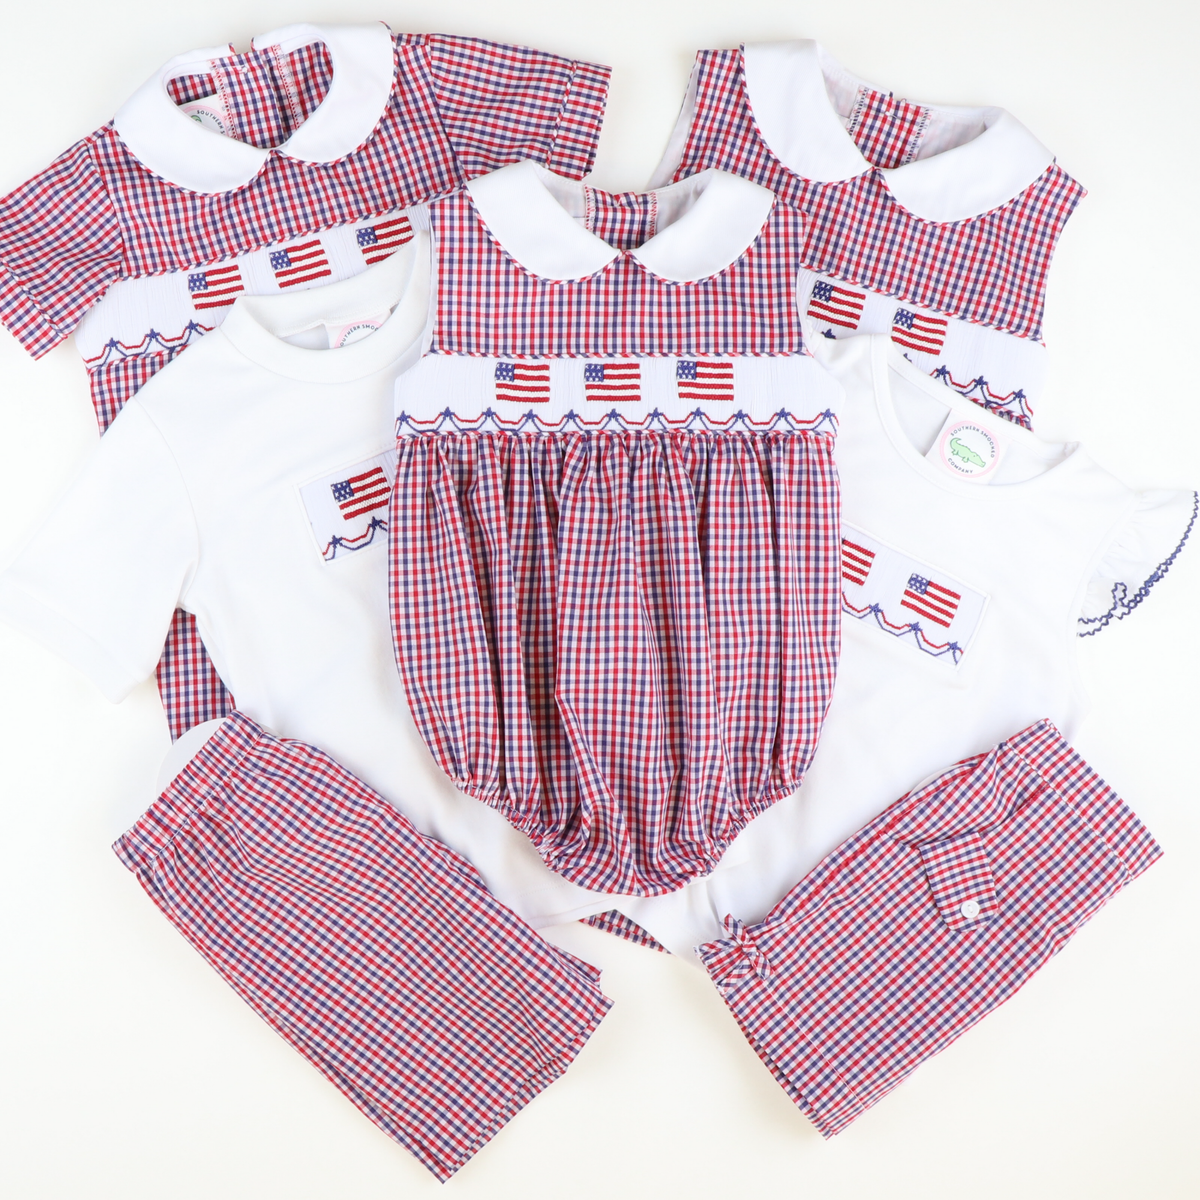 Bow Shorts - Red & Blue Plaid - Stellybelly